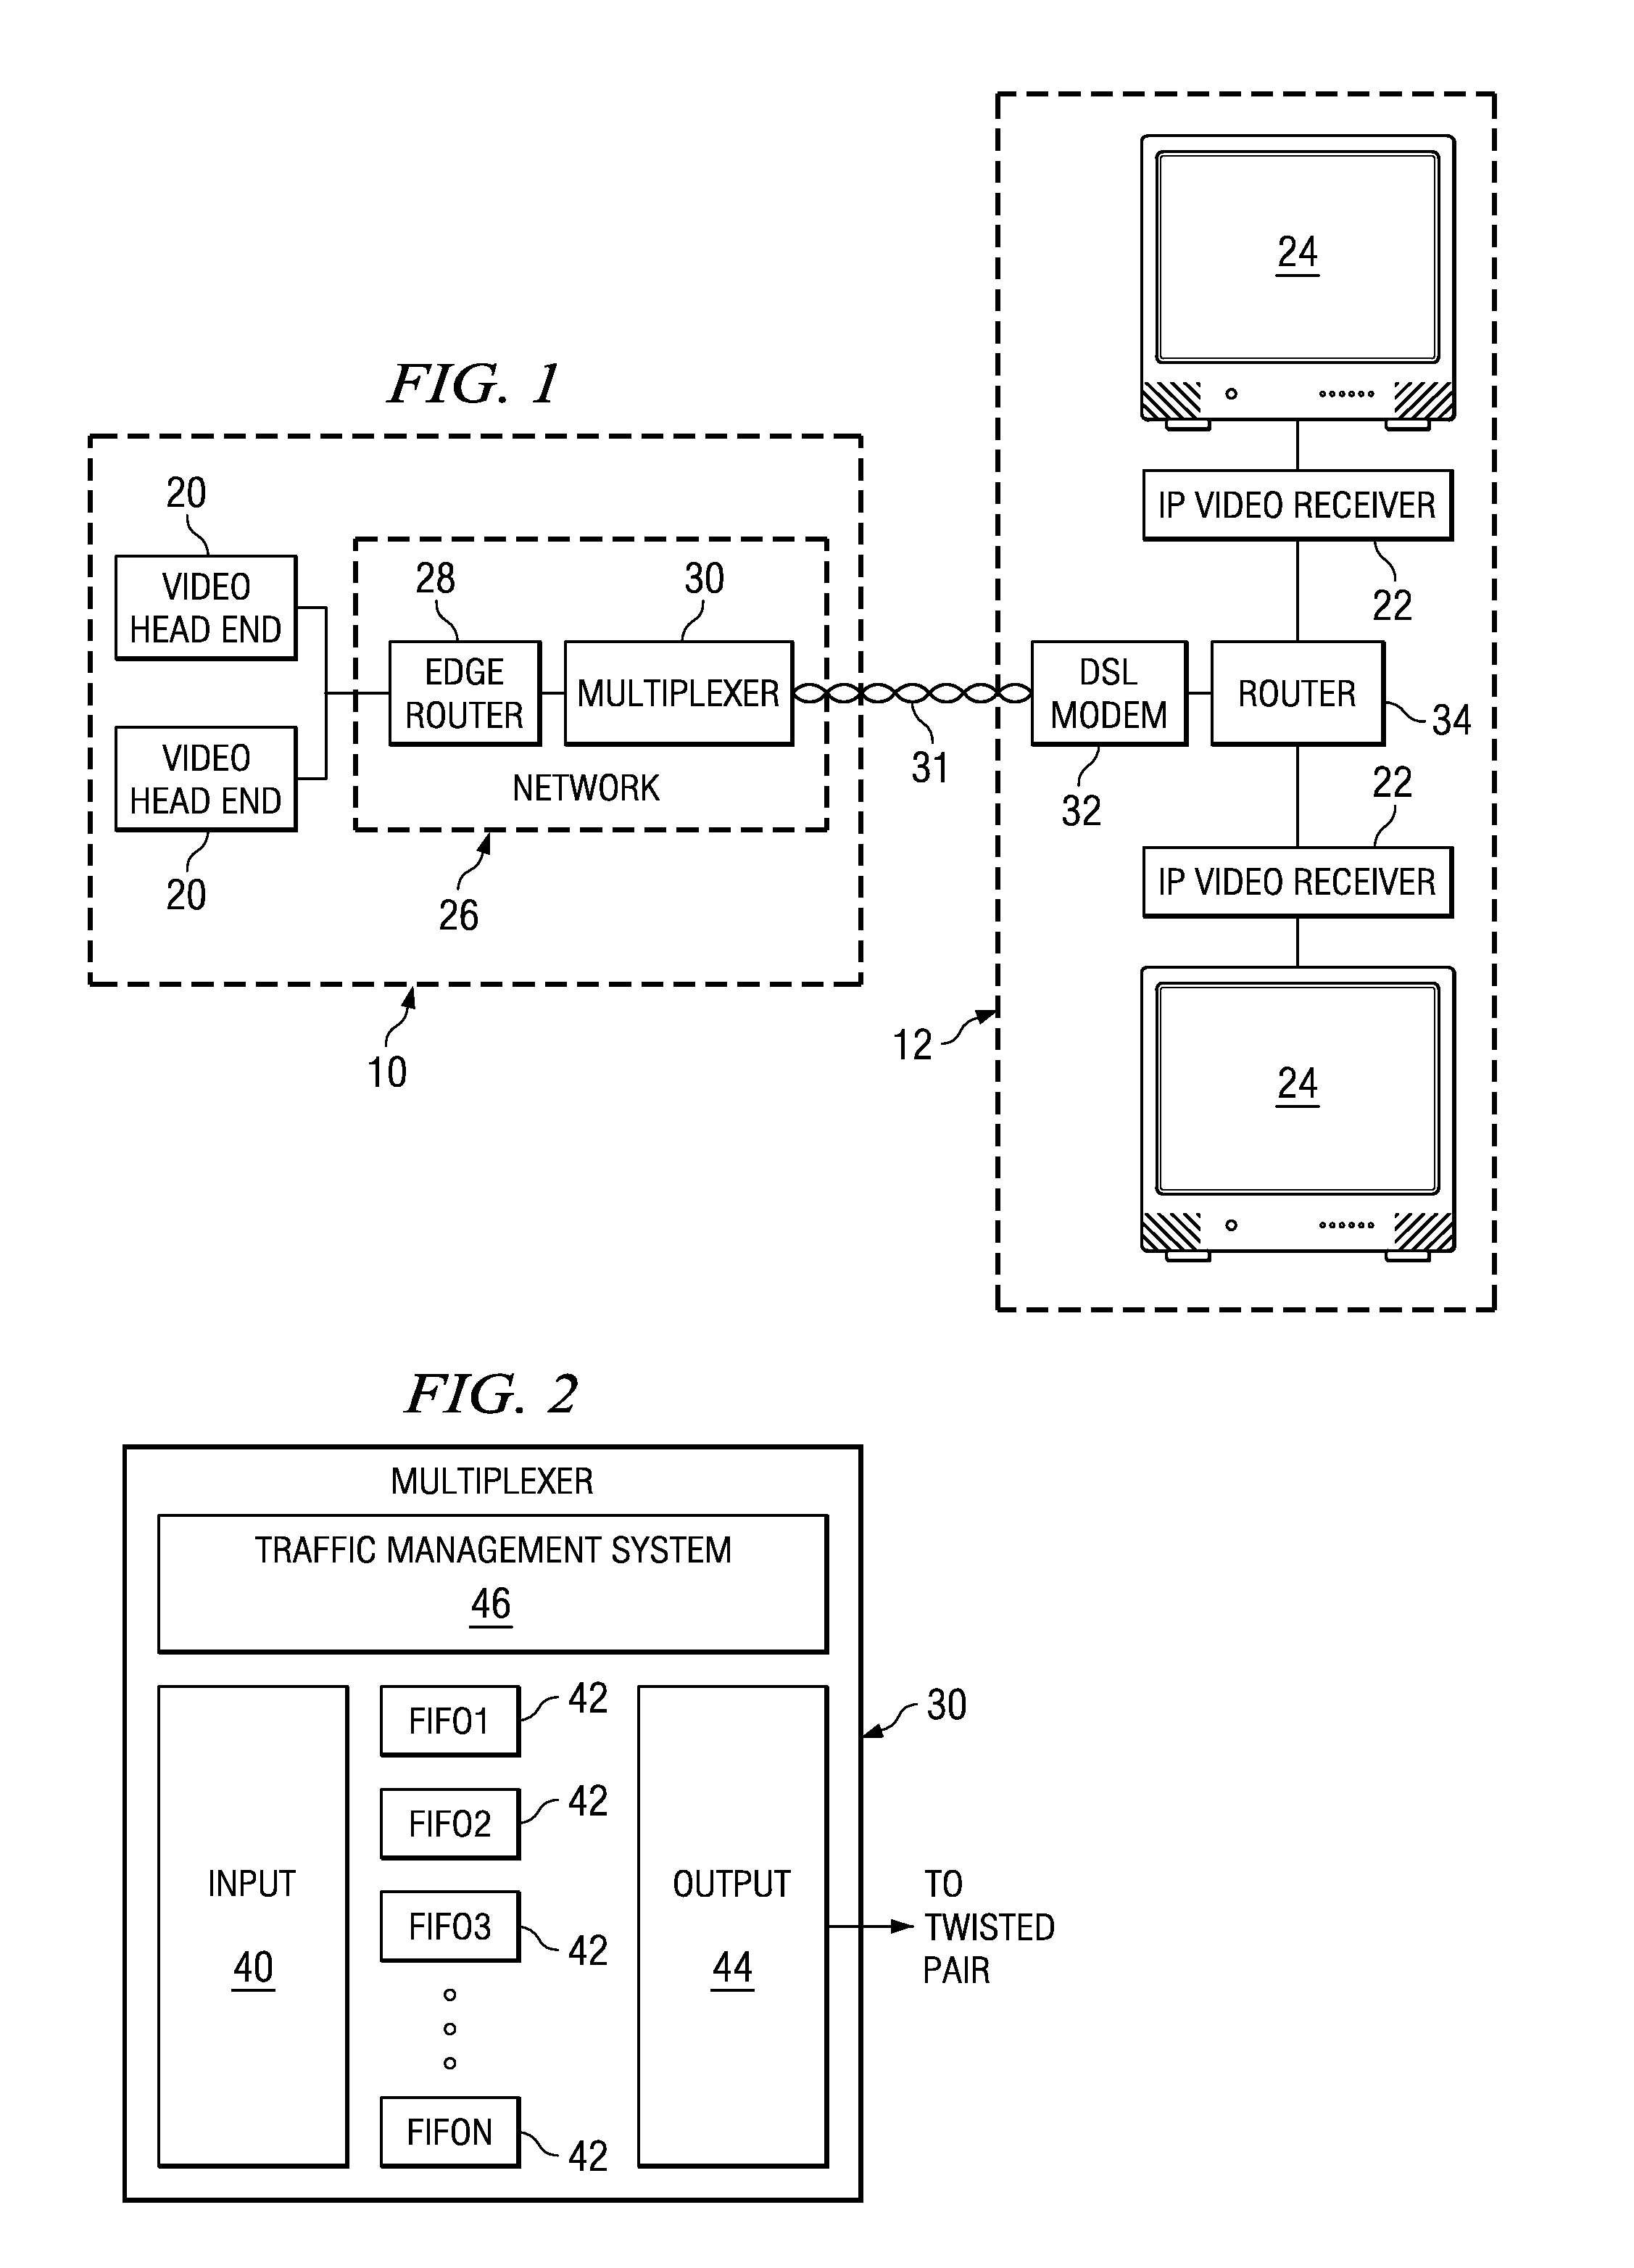 Video packet multiplexer with intelligent packet discard